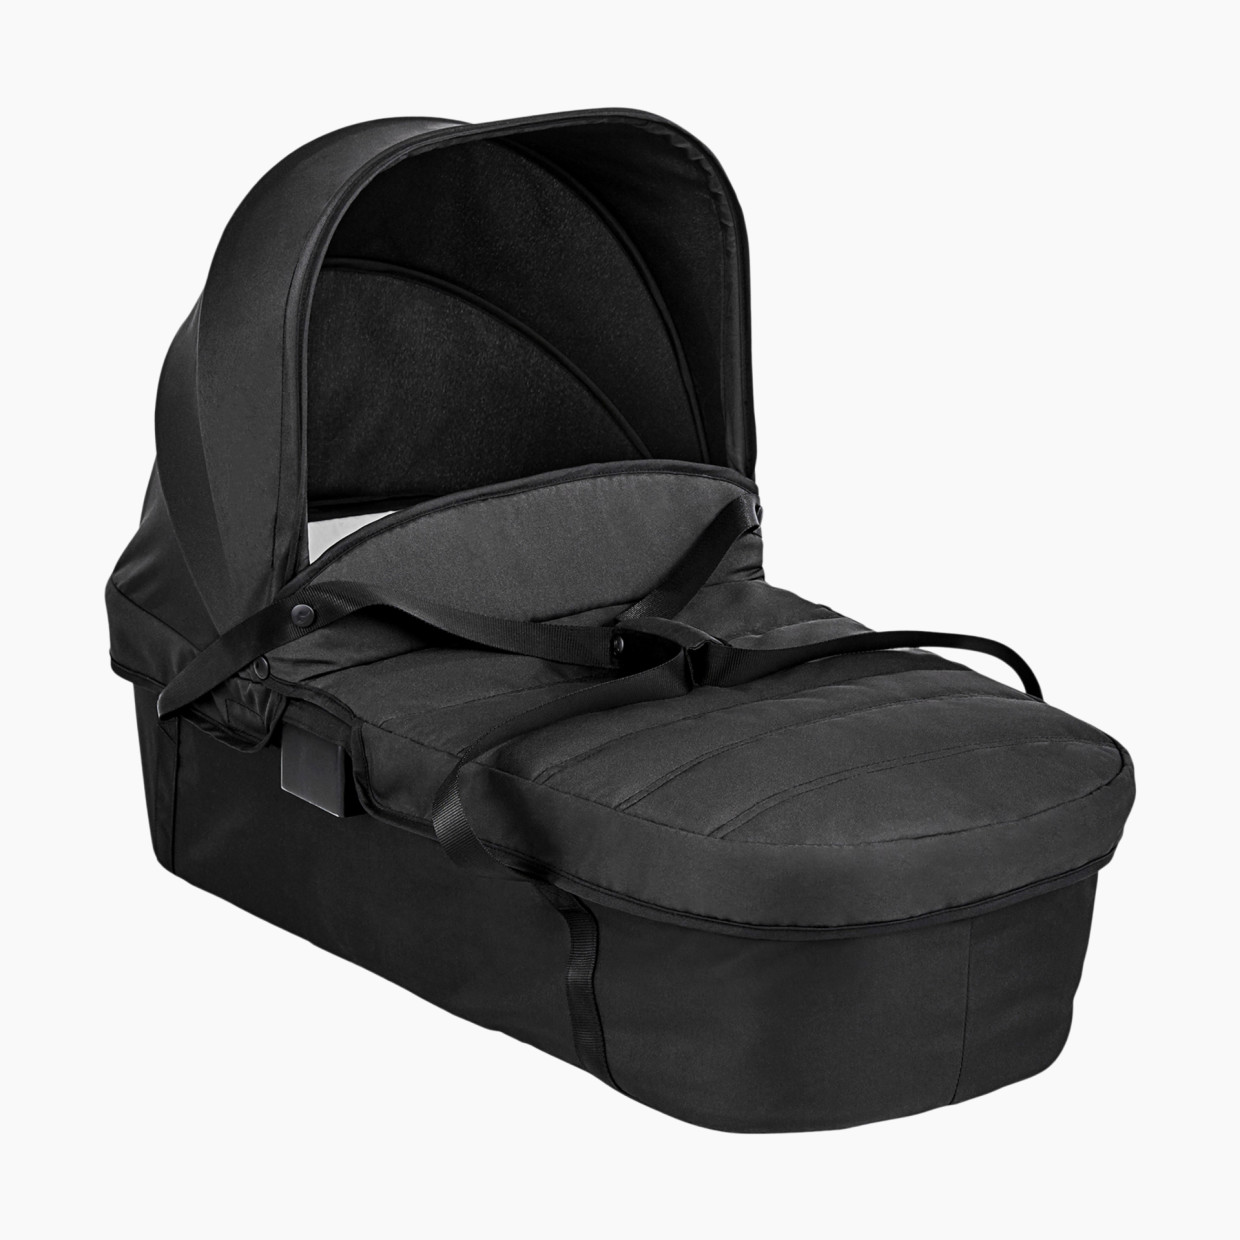 Baby Jogger City Tour 2 Single Stroller Carry Cot - Jet.